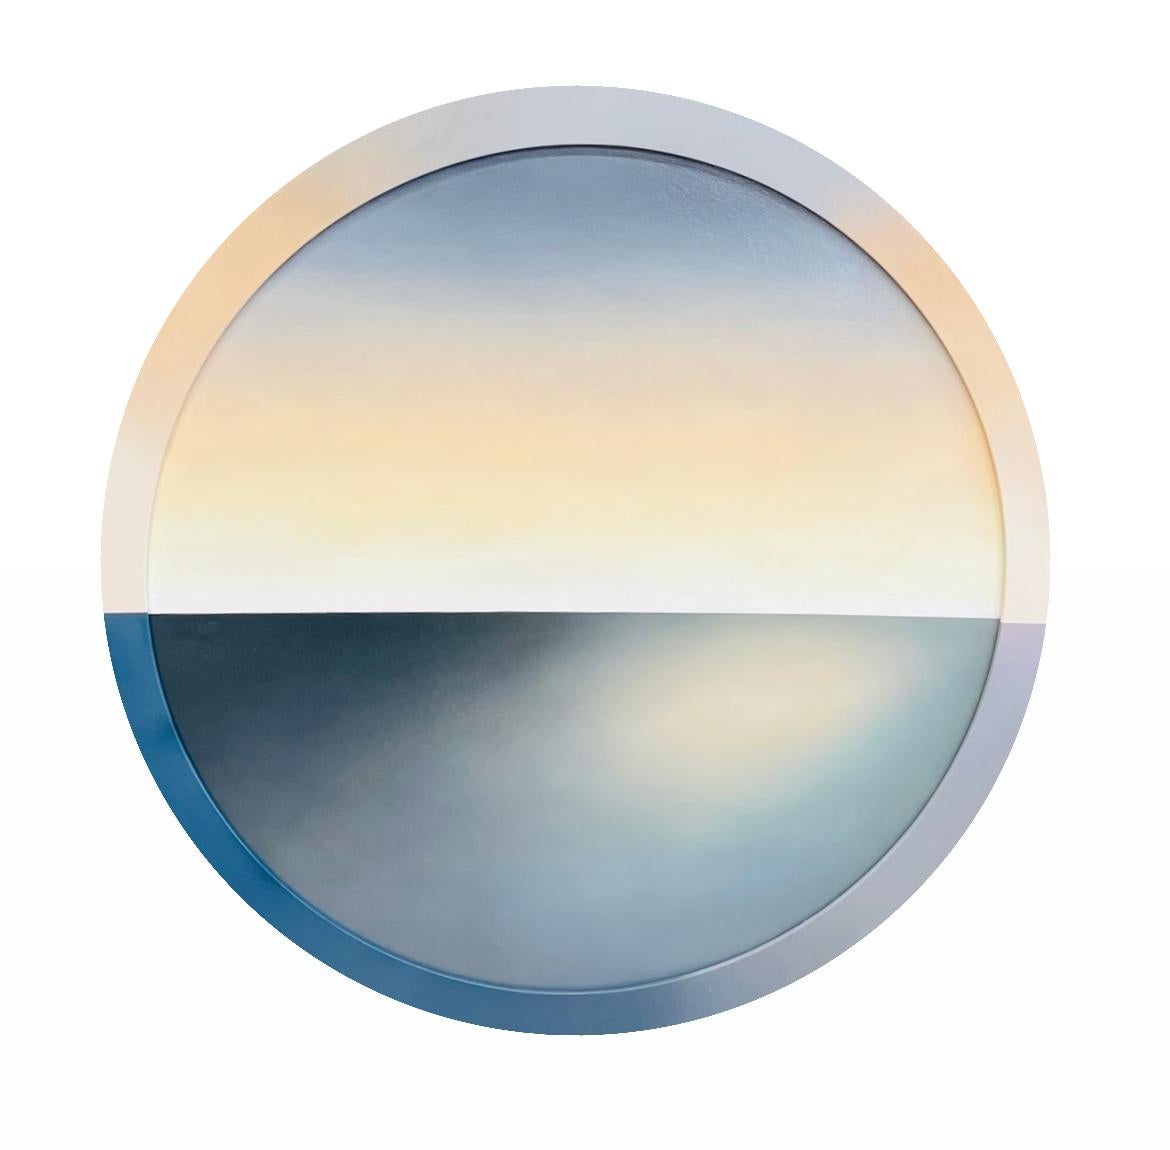 In Stillness, I See by Lyora Pissarro 

2023
Oil paint on board
33 inch diameter
Signed and dated on the reverse

Shipping is not included. Please contact us for shipping quotes and customization options. 
 
All sales are final.